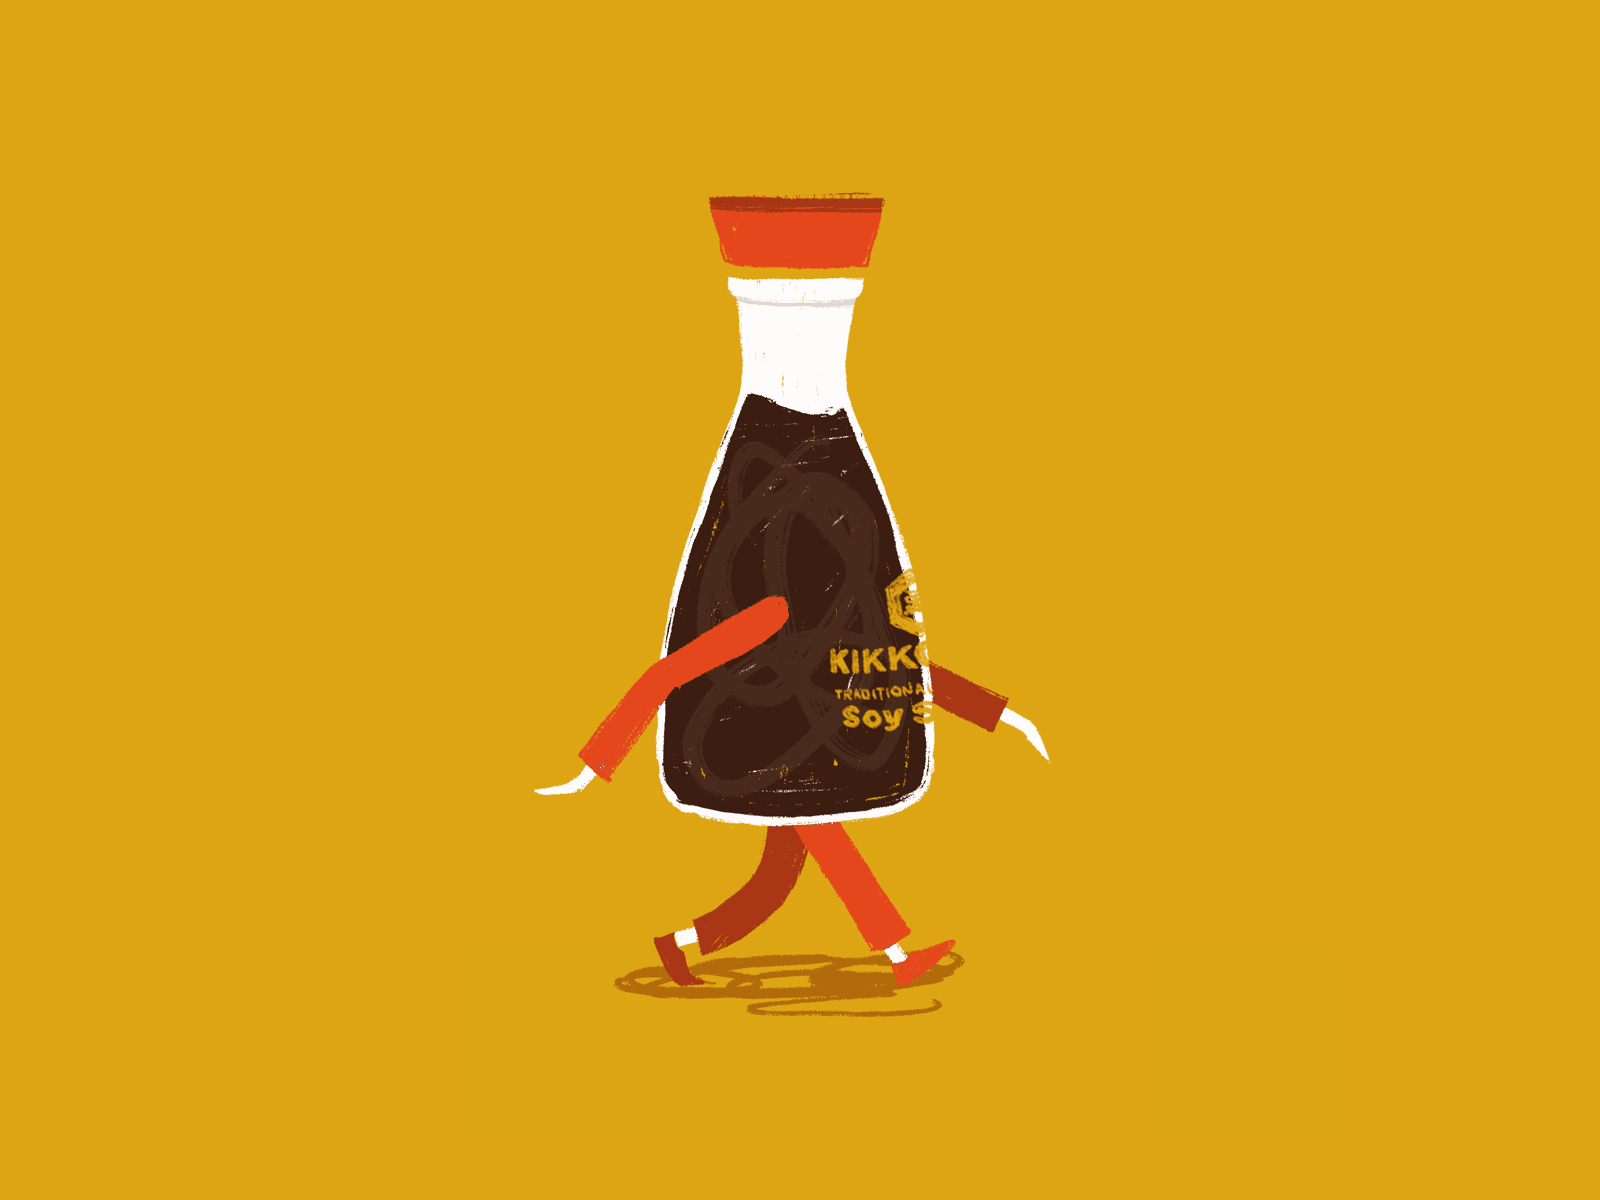 how to animate: walking soy sauce